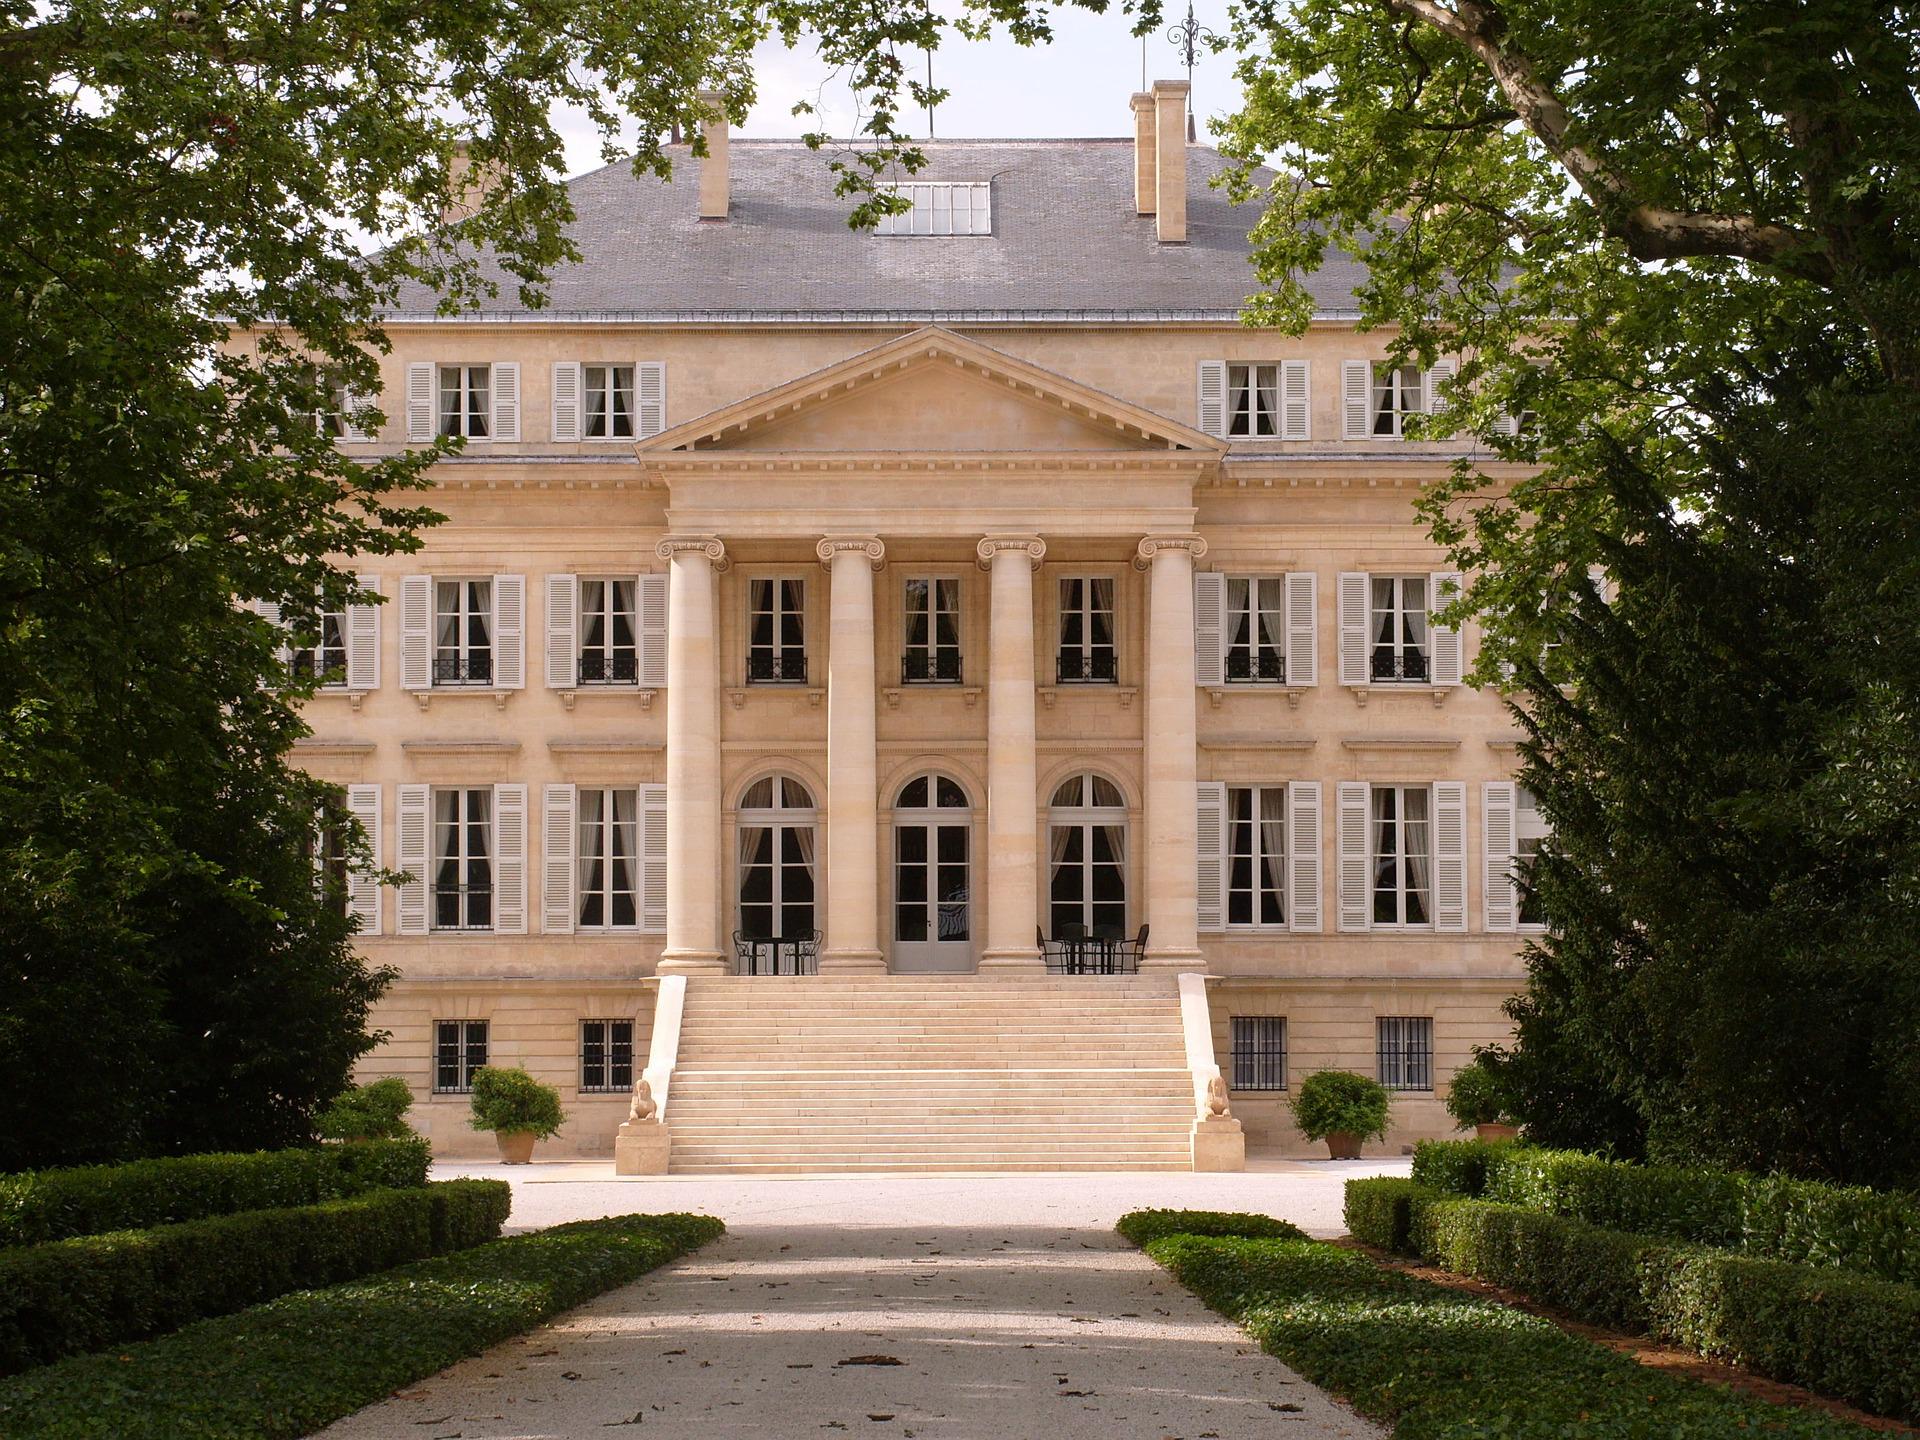 The grand Chateaux of Bordeaux are famous around the world